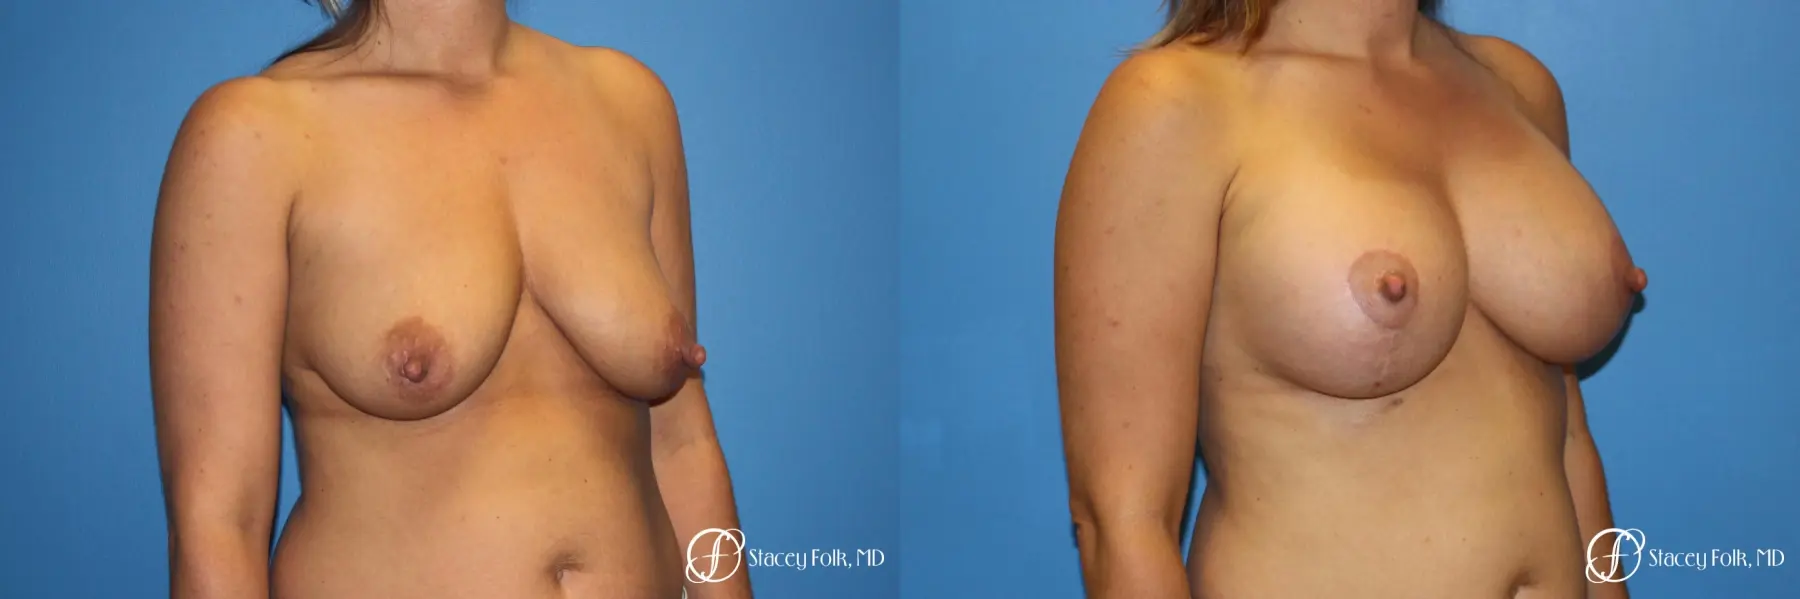 Denver Breast Lift and Augmentation 8629 - Before and After 2